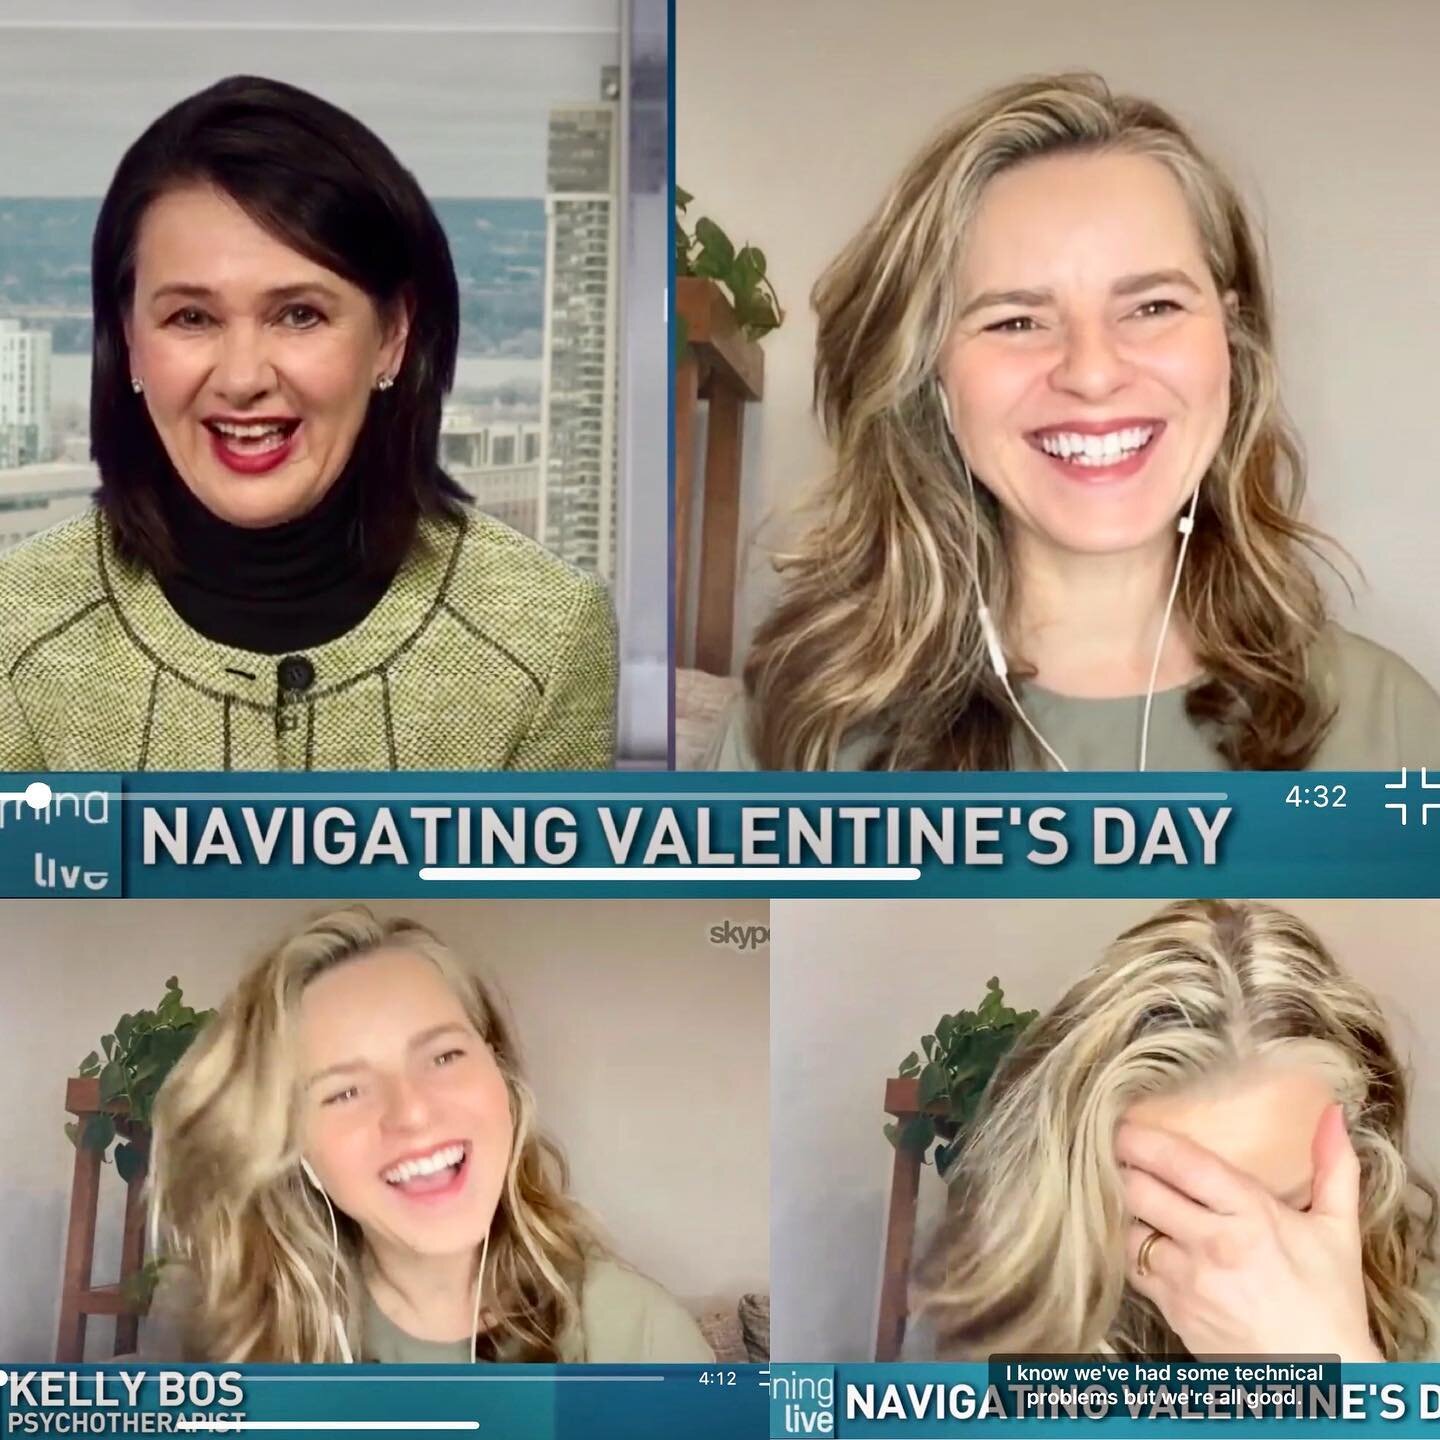 I like to call today&rsquo;s segment, Navigating Valentine&rsquo;s Day AND Technical Difficulties. Haha. We had some great laughs this morning on @chch_morninglive with @annette.hamm starting with my phantom screen problems. My pride has almost recov